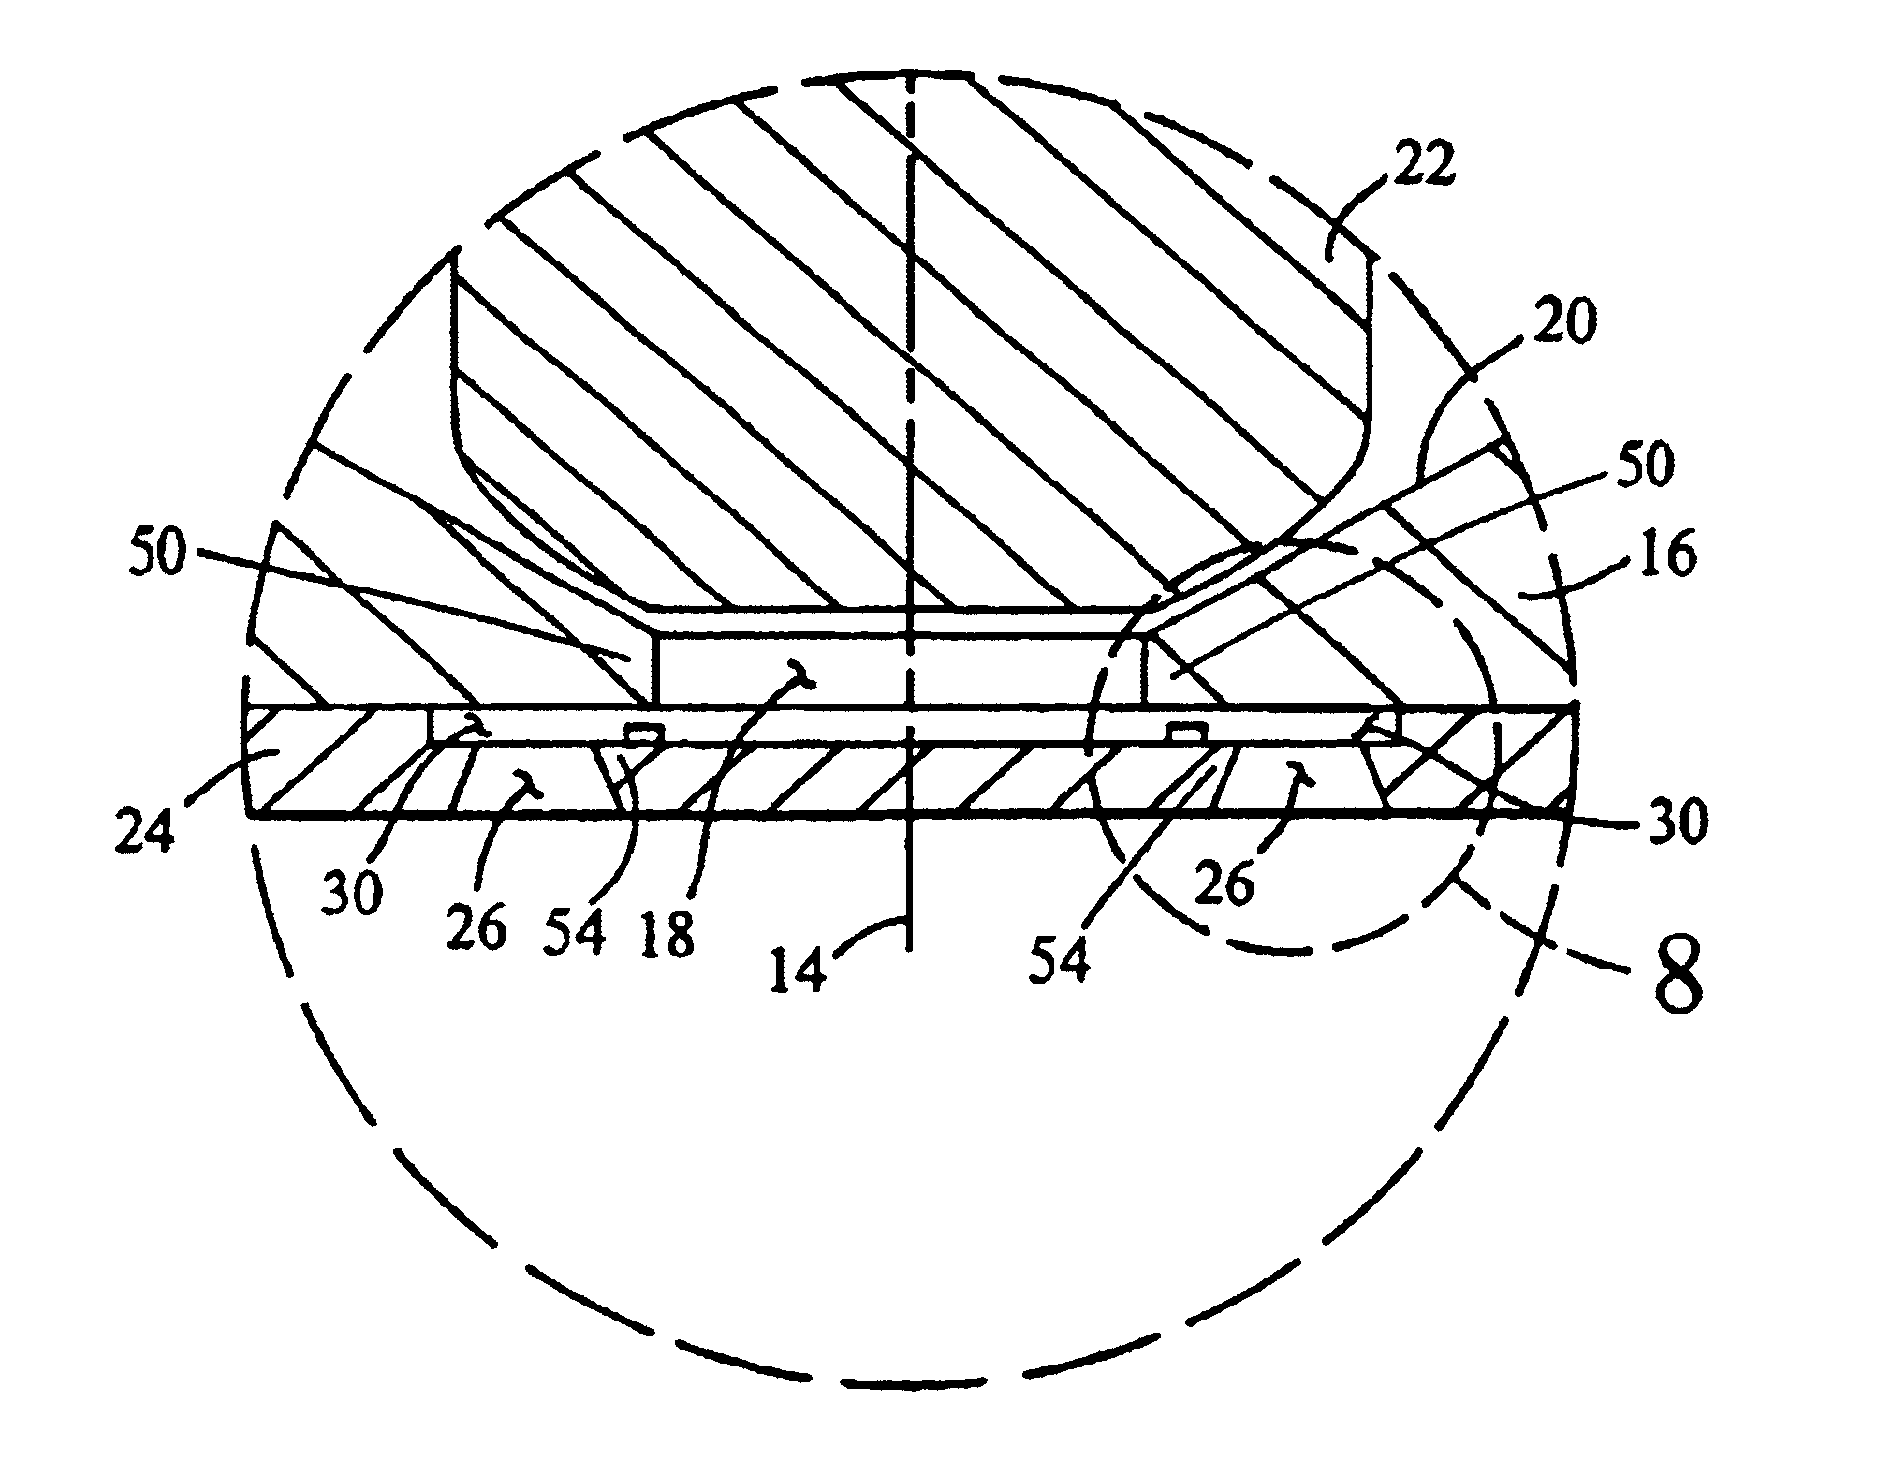 Fuel injector nozzle assembly with induced turbulence